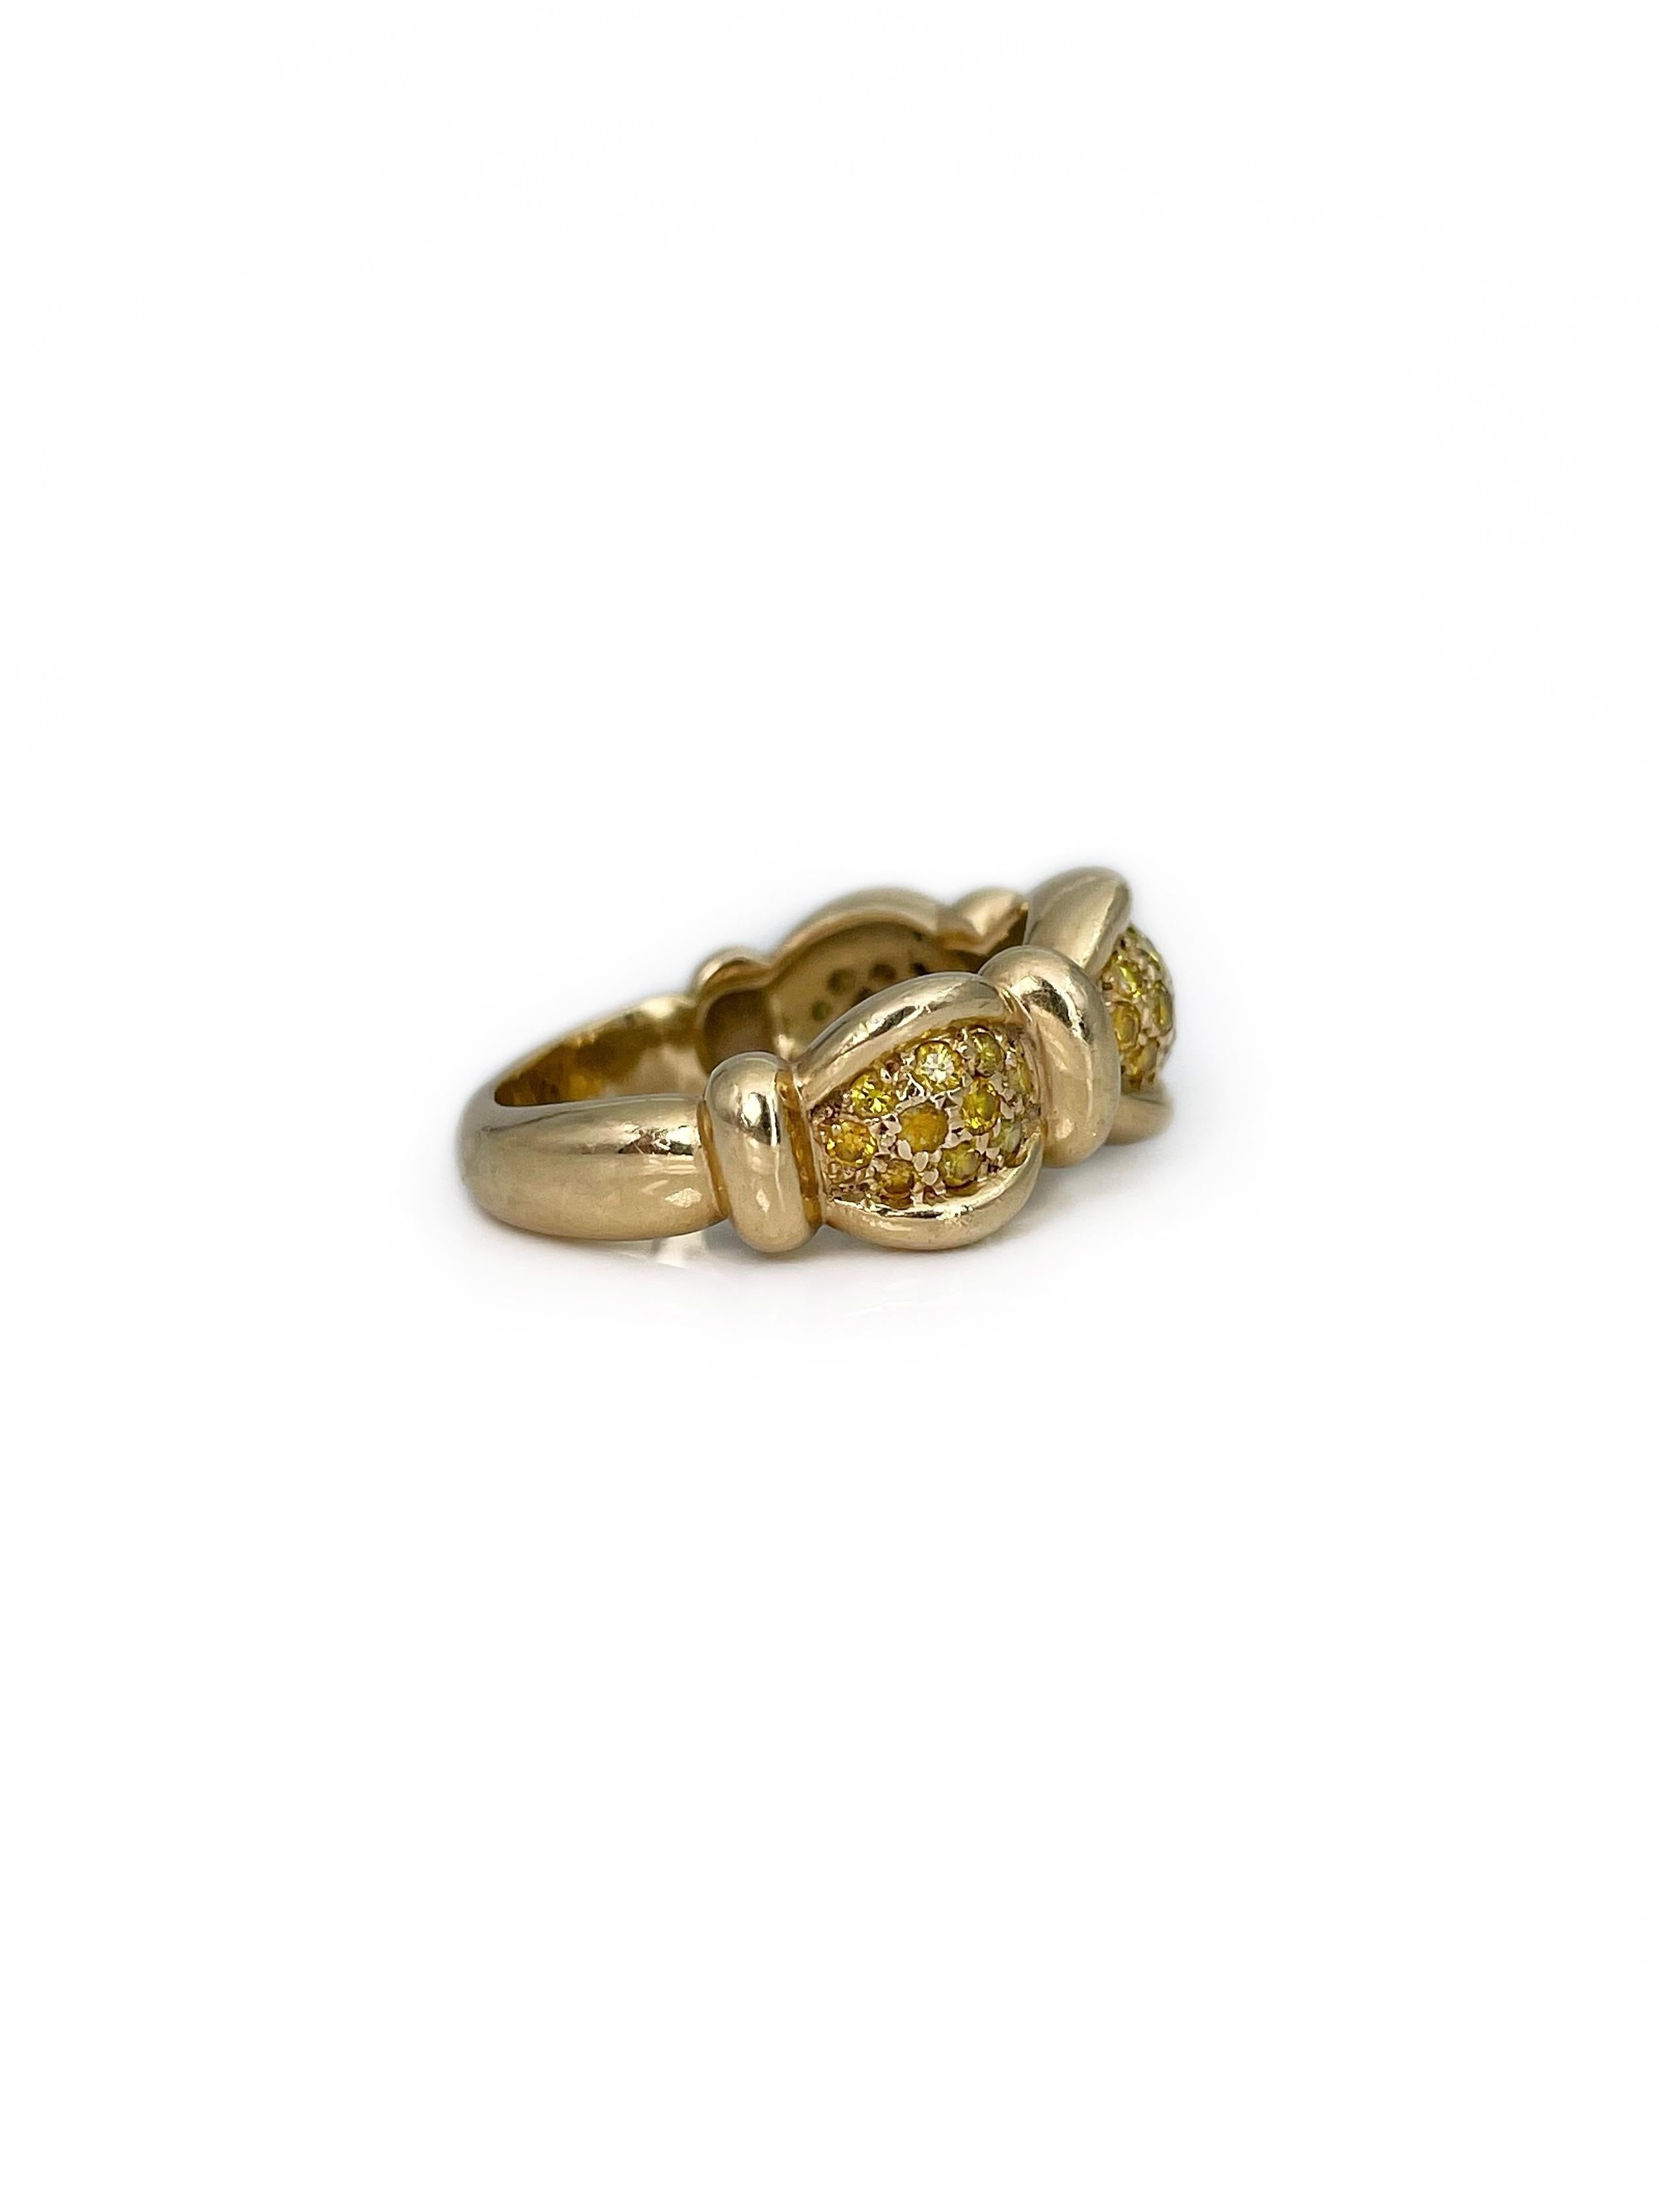 This is a beautiful cocktail band ring crafted in 14K yellow gold. The piece features 33 pcs. brilliant cut Fancy yellow diamonds: TW 0.65ct, VS-SI

Weight: 8.31g 
Size: 16.5 (US 6)

IMPORTANT: please ask about the possibility to resize before